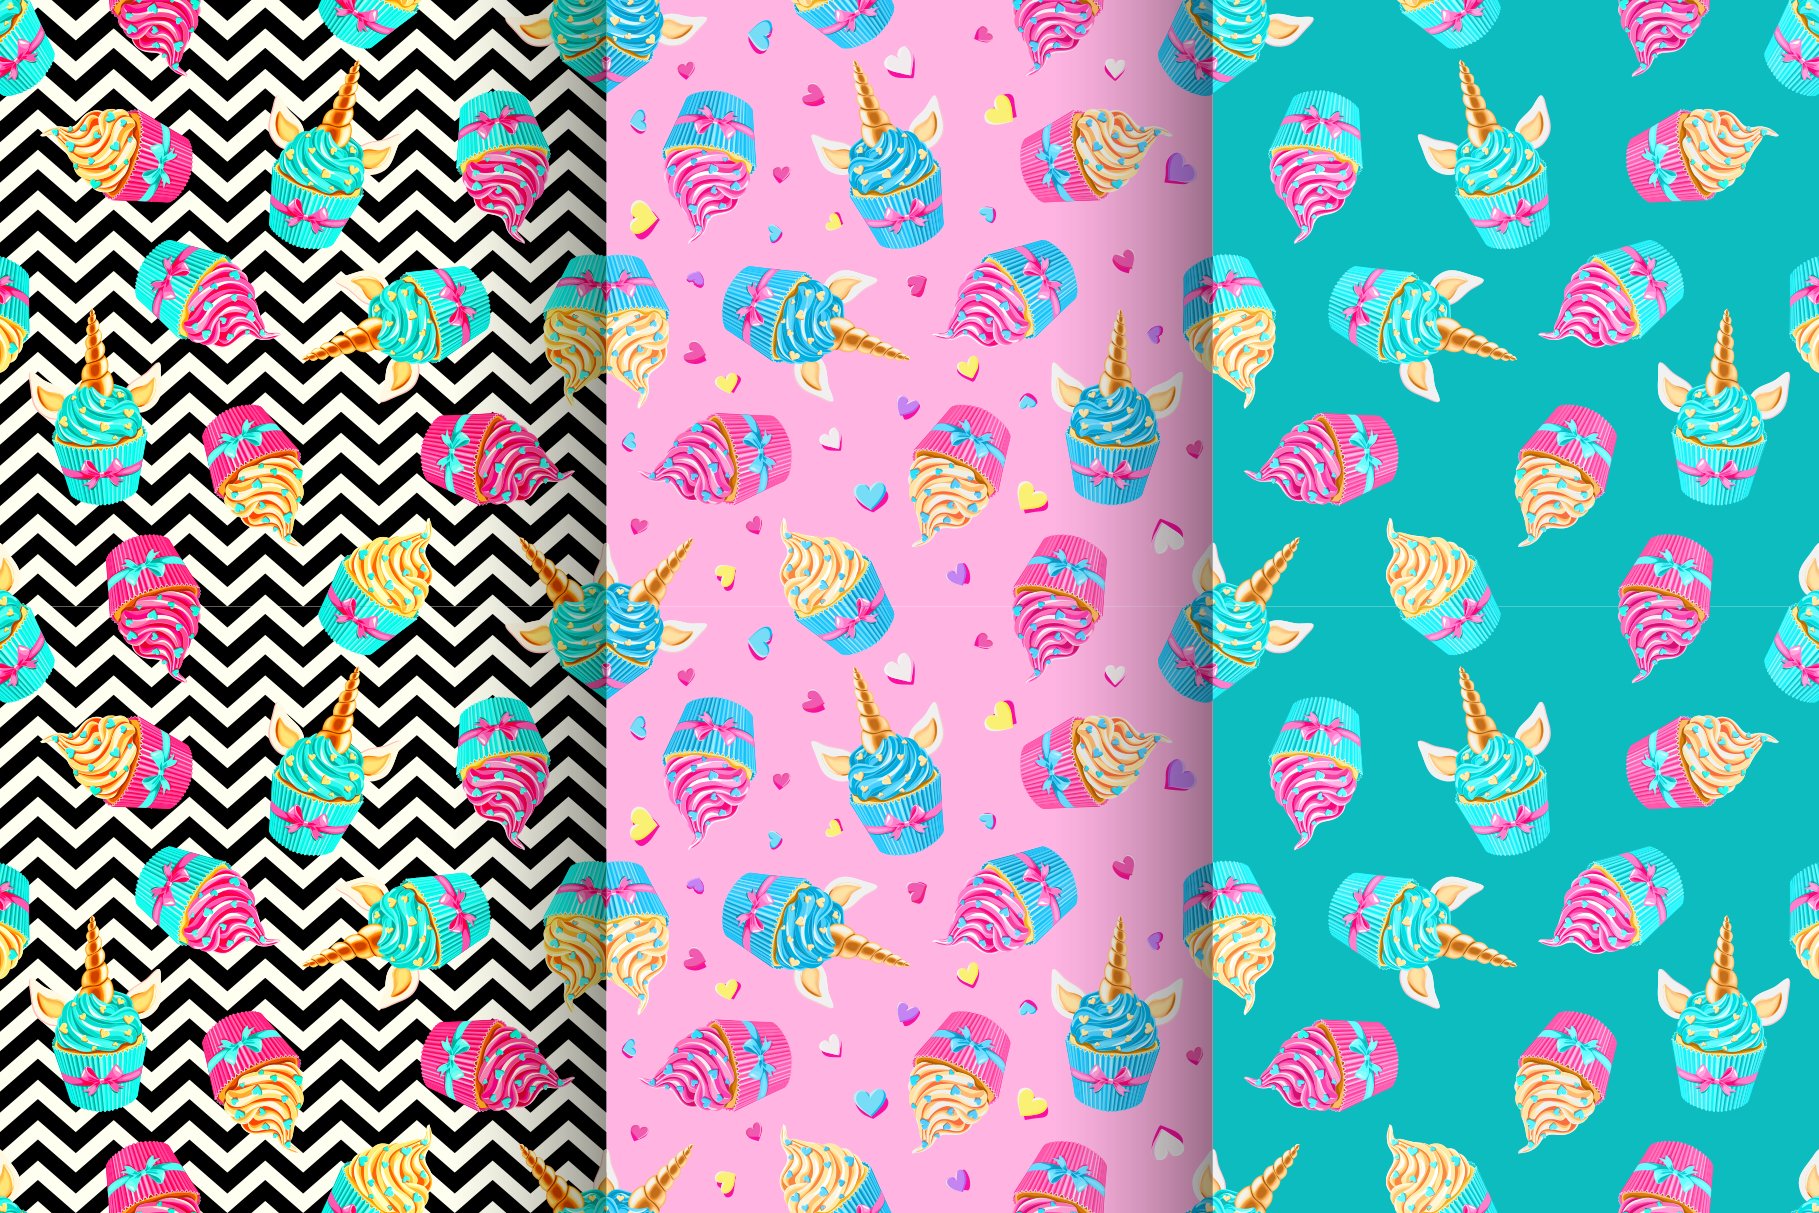 Fairy cakes patterns big set preview image.